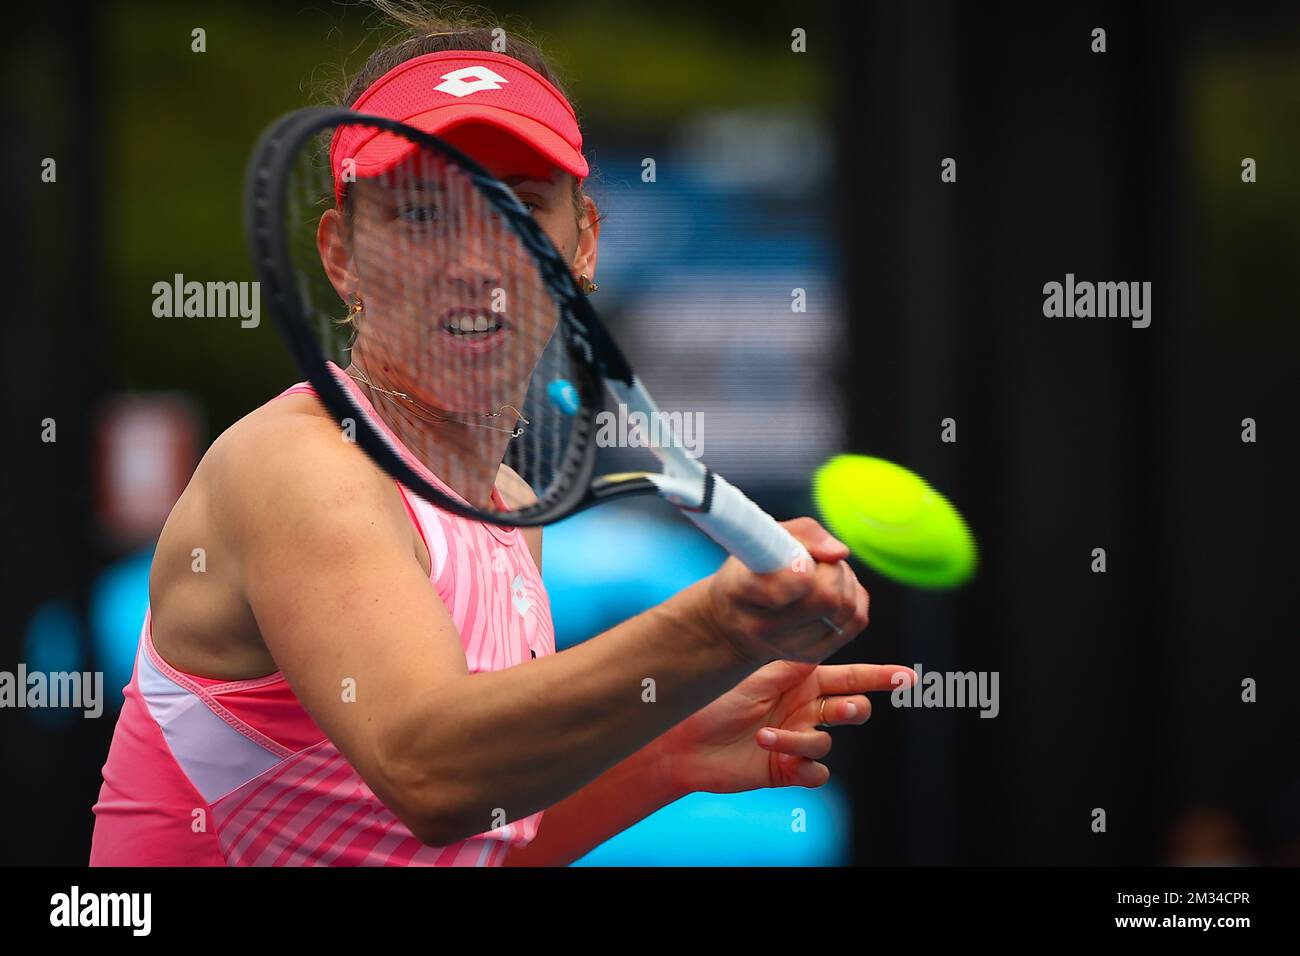 Belgian Elise Mertens (WTA 20) plays a forehand during a tennis match against Japanese Mayo Hibi (WTA184), in the second round of the women's singles at the Yarra Valley Classic tournament, a Summer Series tournament ahead of the Australian Open grand slam, Tuesday 02 February 2021 in Melbourne Park, Melbourne, Australia. BELGA PHOTO PATRICK HAMILTON Stock Photo